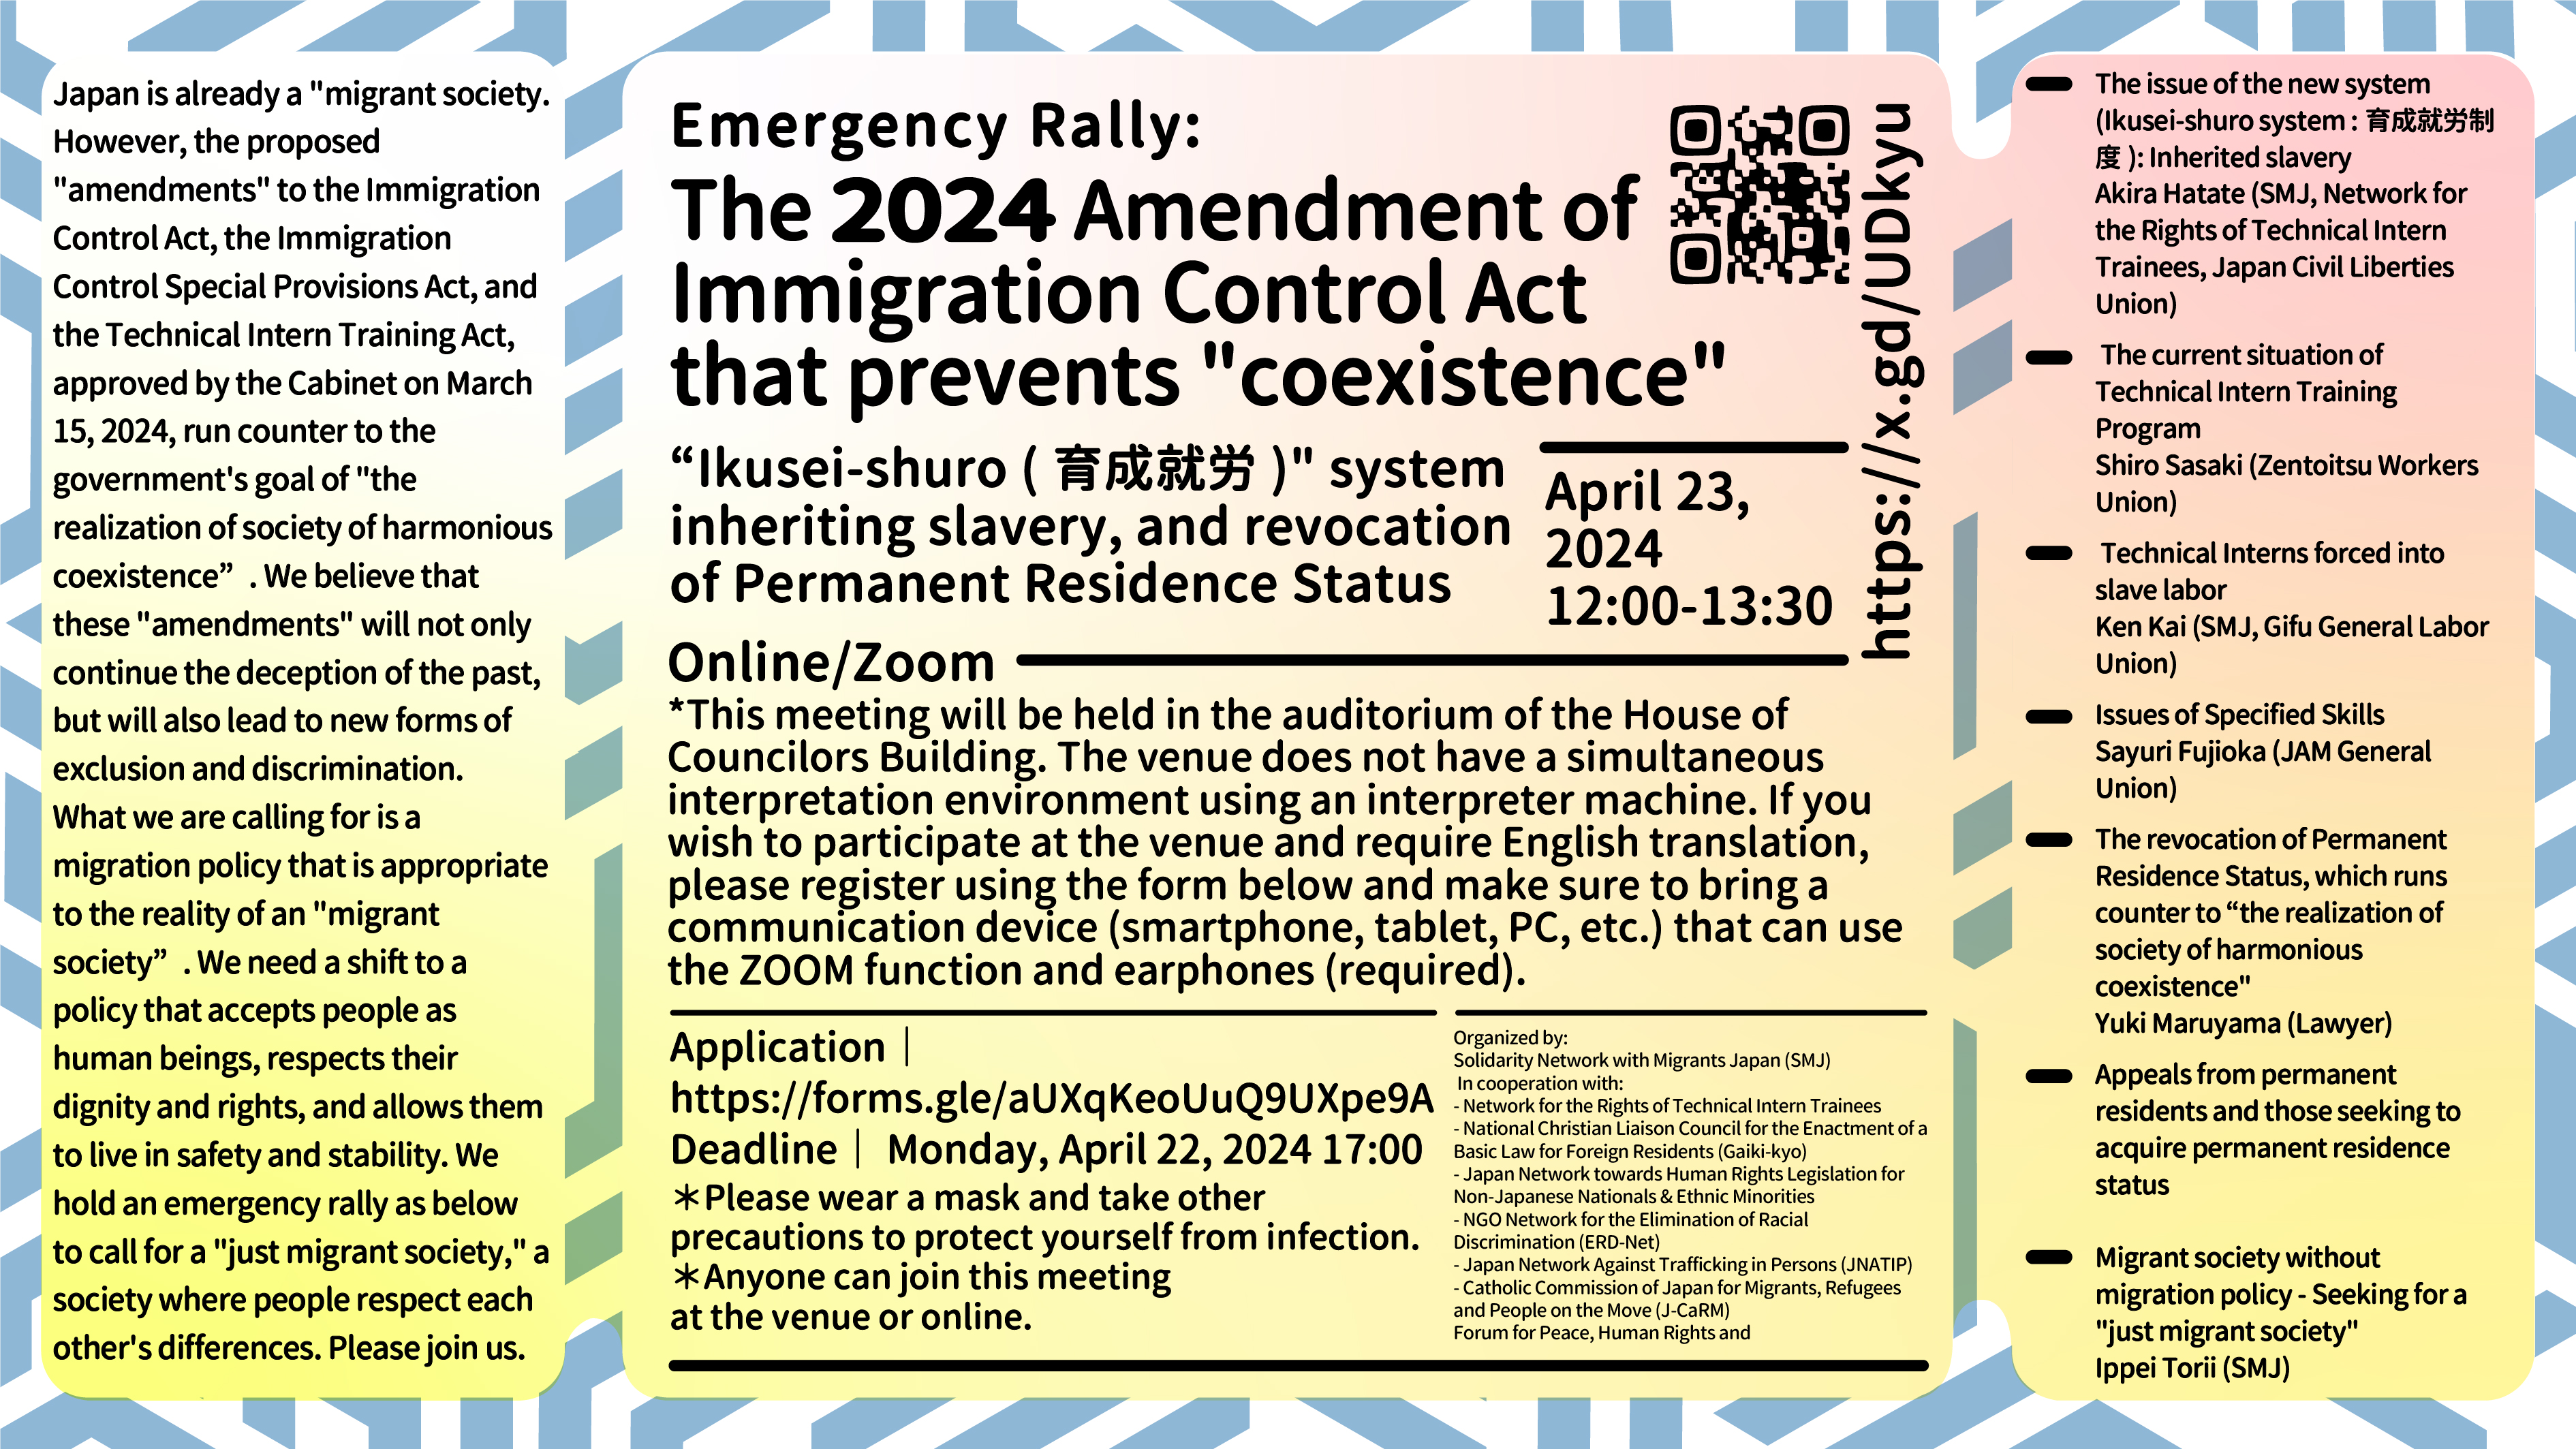 【Emergency Rally】
The 2024 Amendment of Immigration Control Act that prevents 